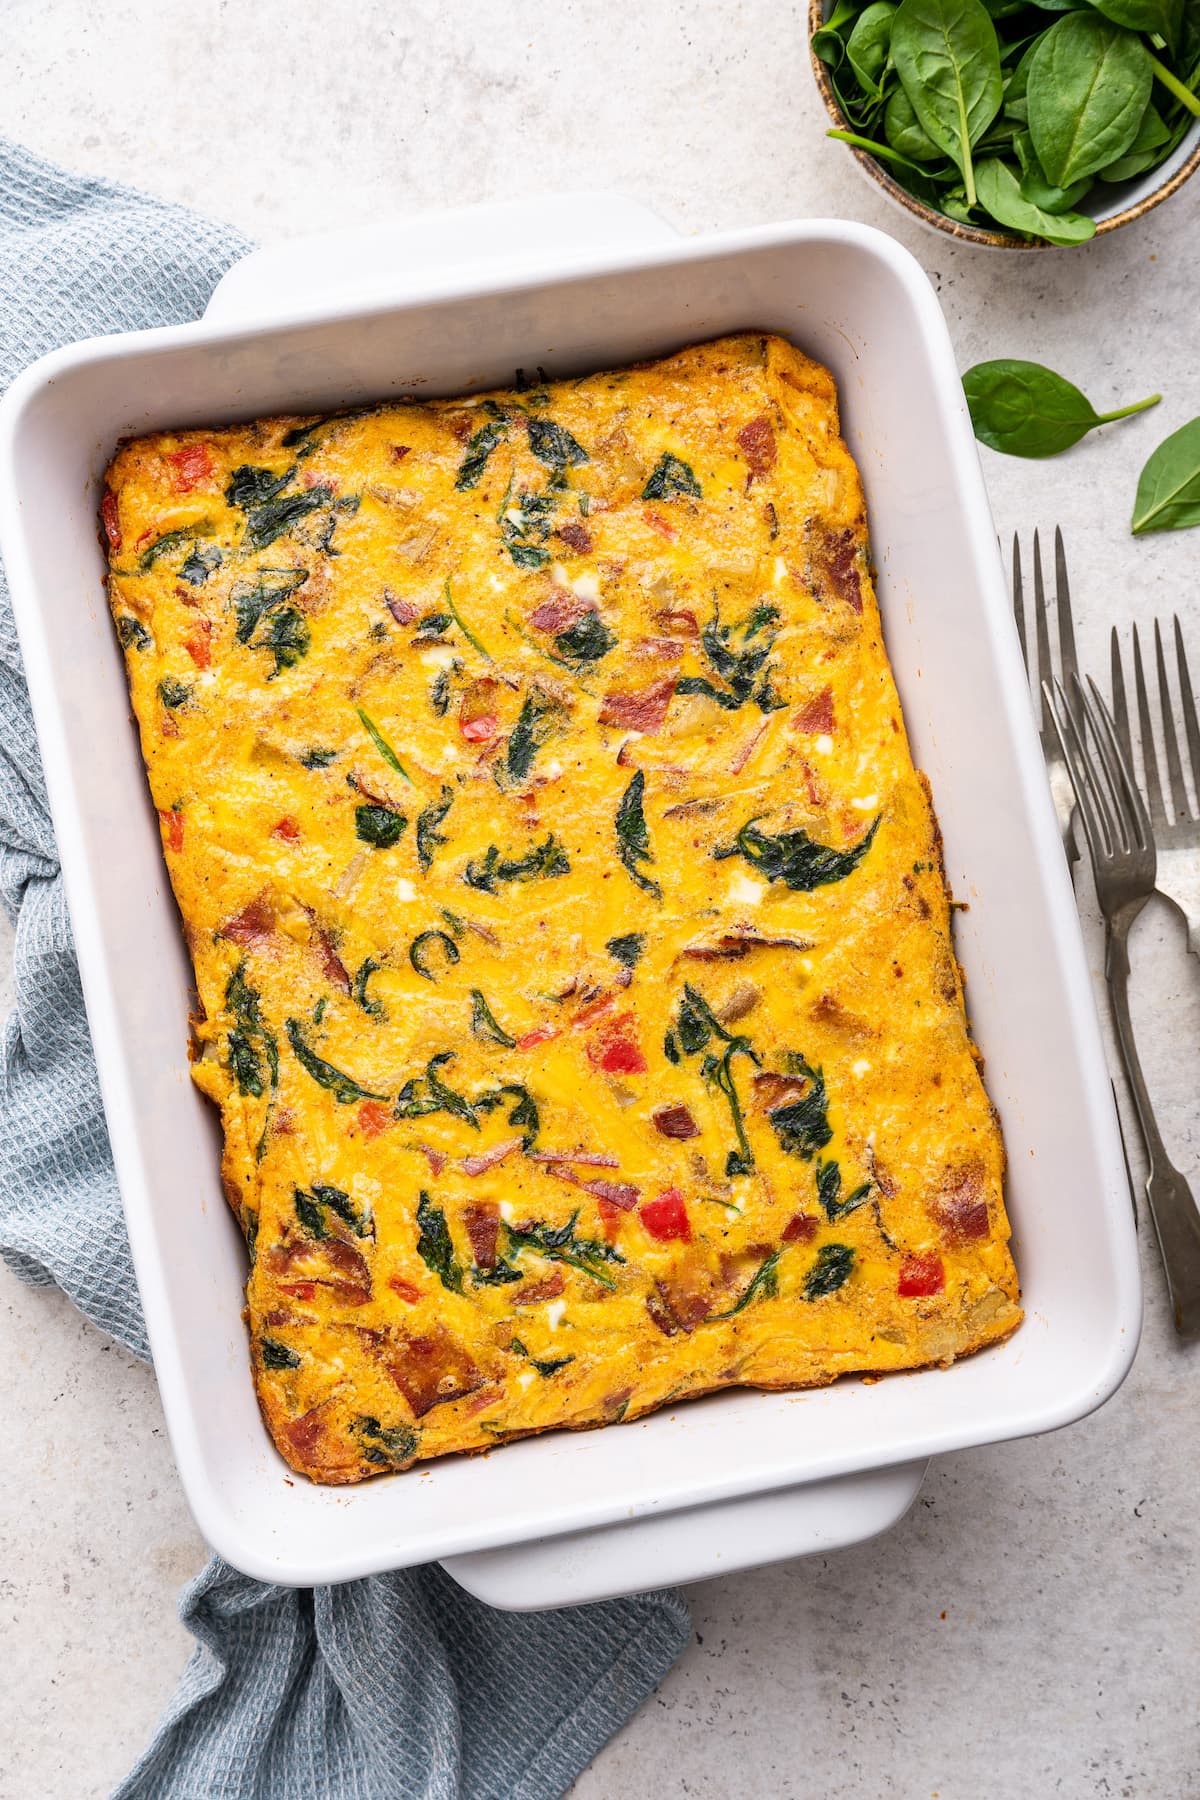 An egg casserole in a square baking dish.